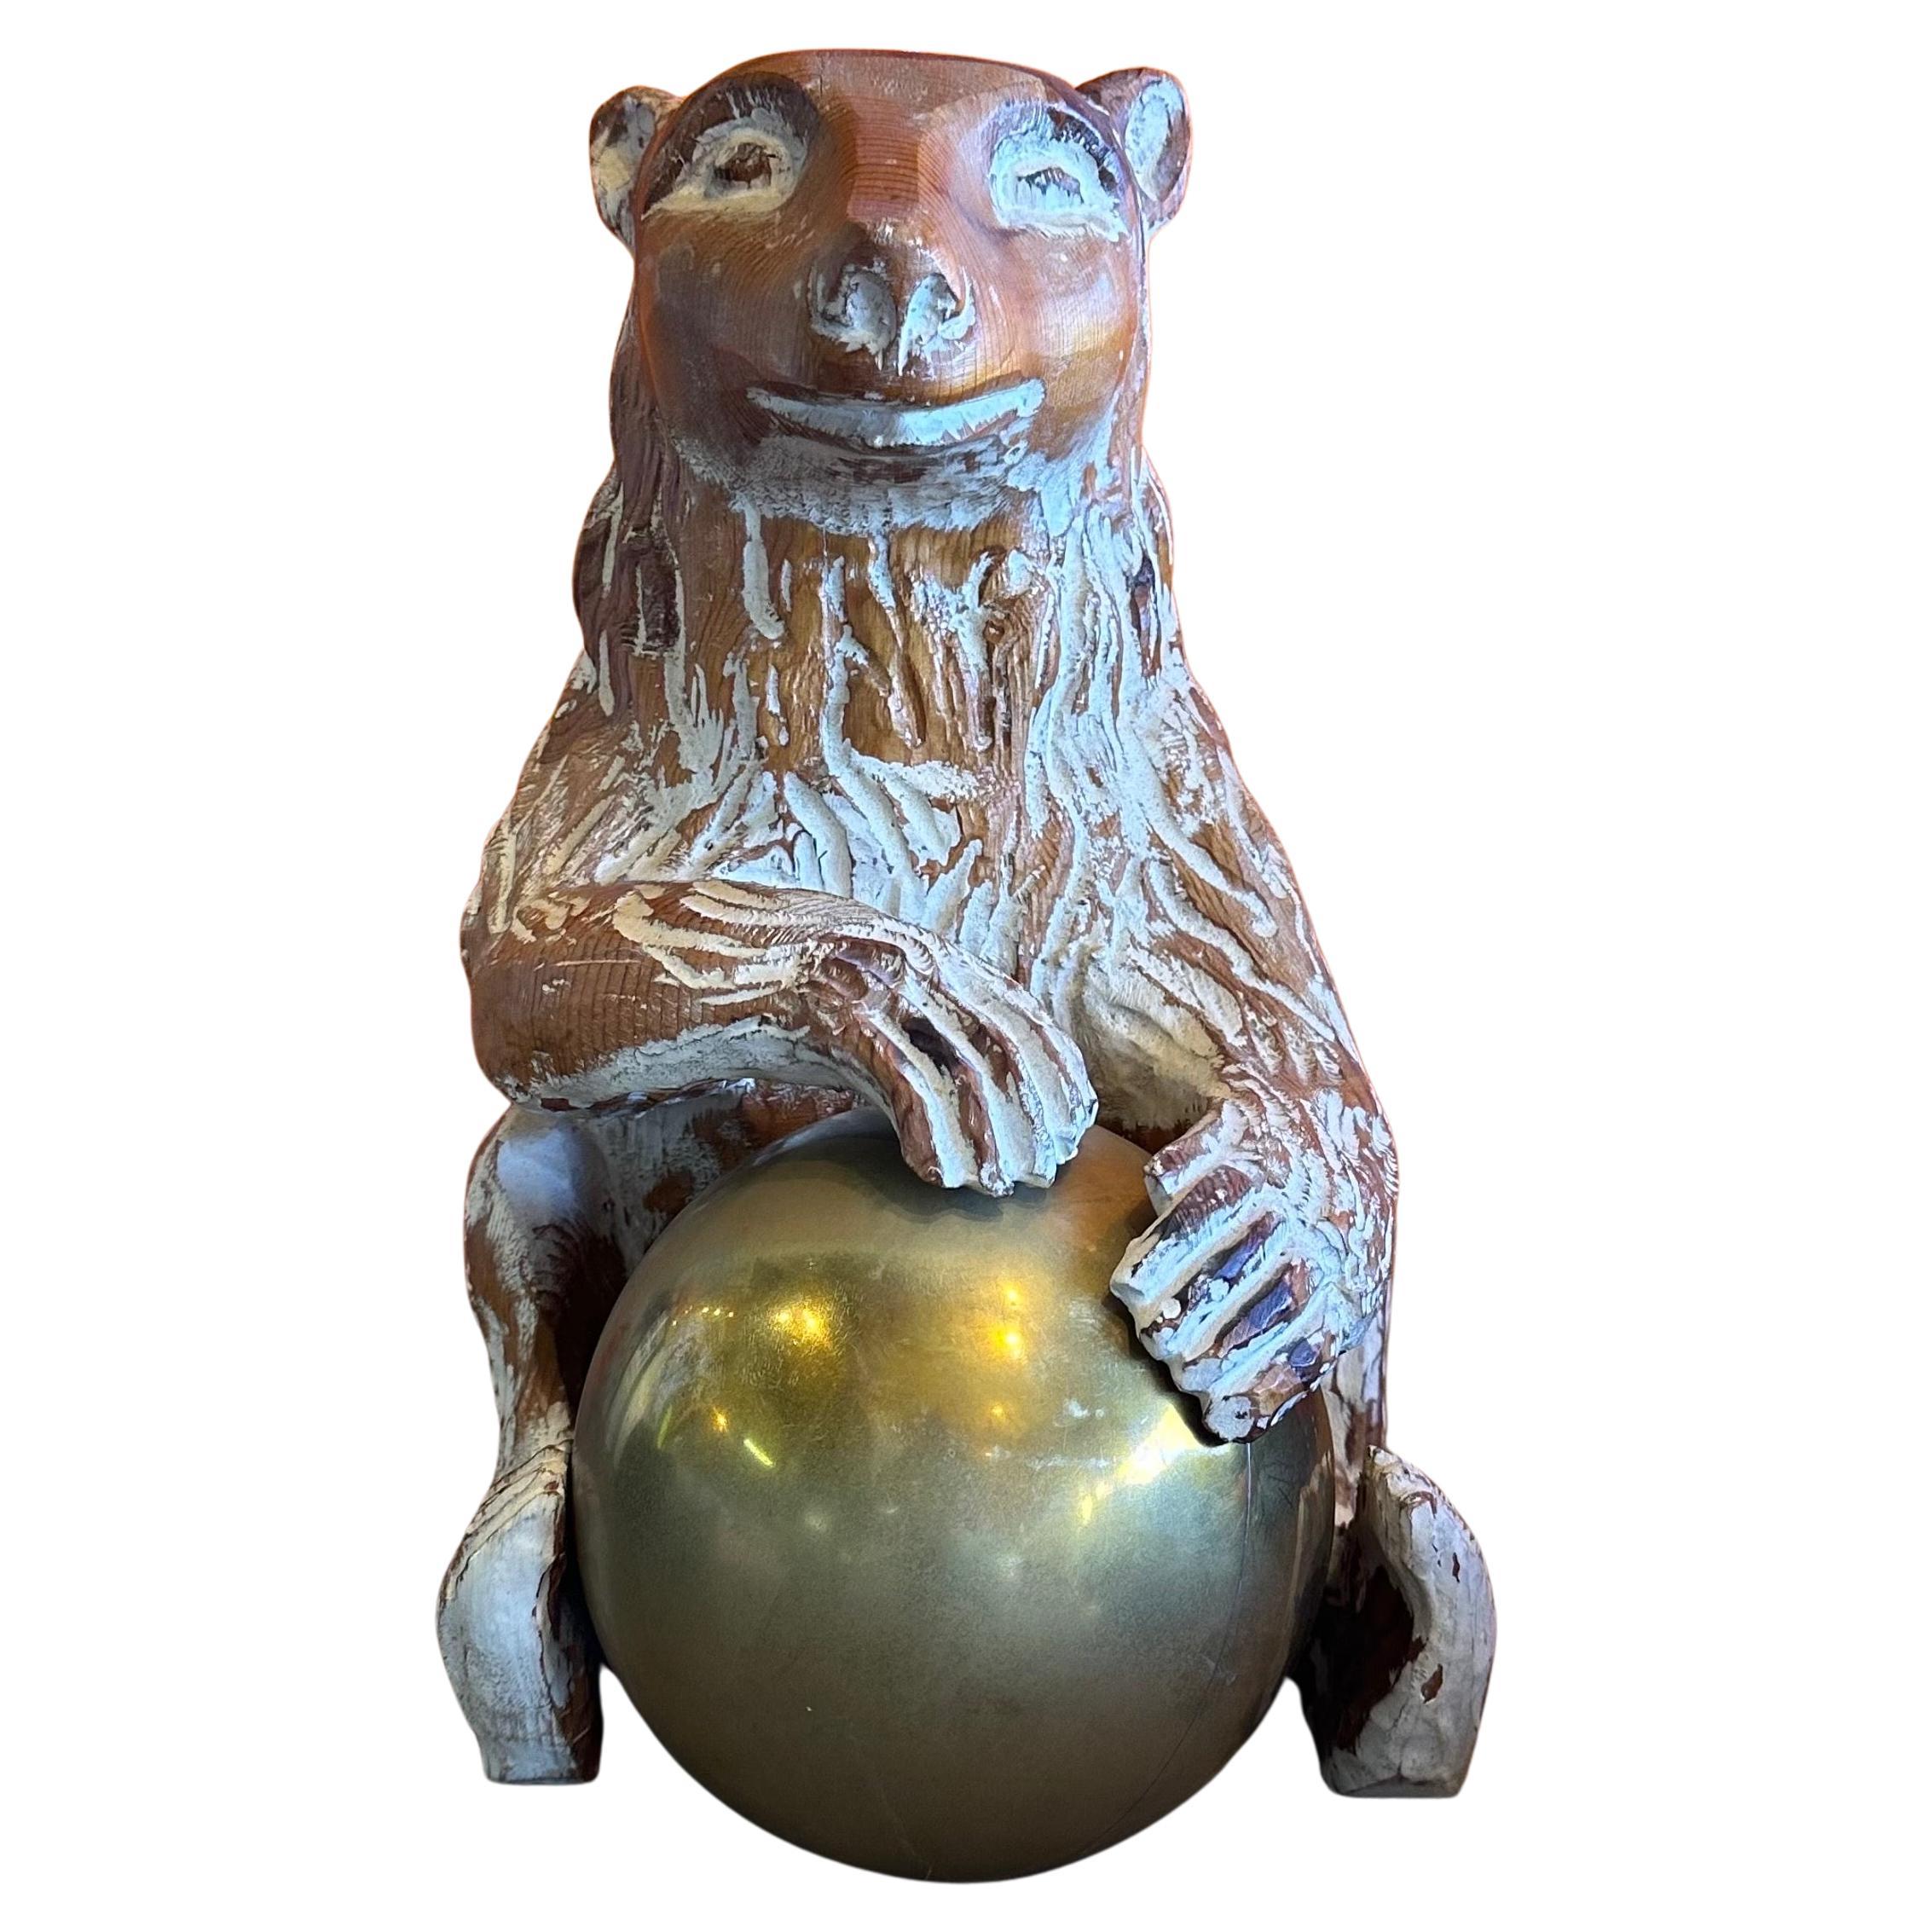 A nice hand carved knotty pine wood and brass bear sculpture by Sarreid, circa 1970s. The sculpture, which was made in Spain, is in very good condition and has a white wash overlay finish.  The bear is playing with a brass ball.   The piece measures